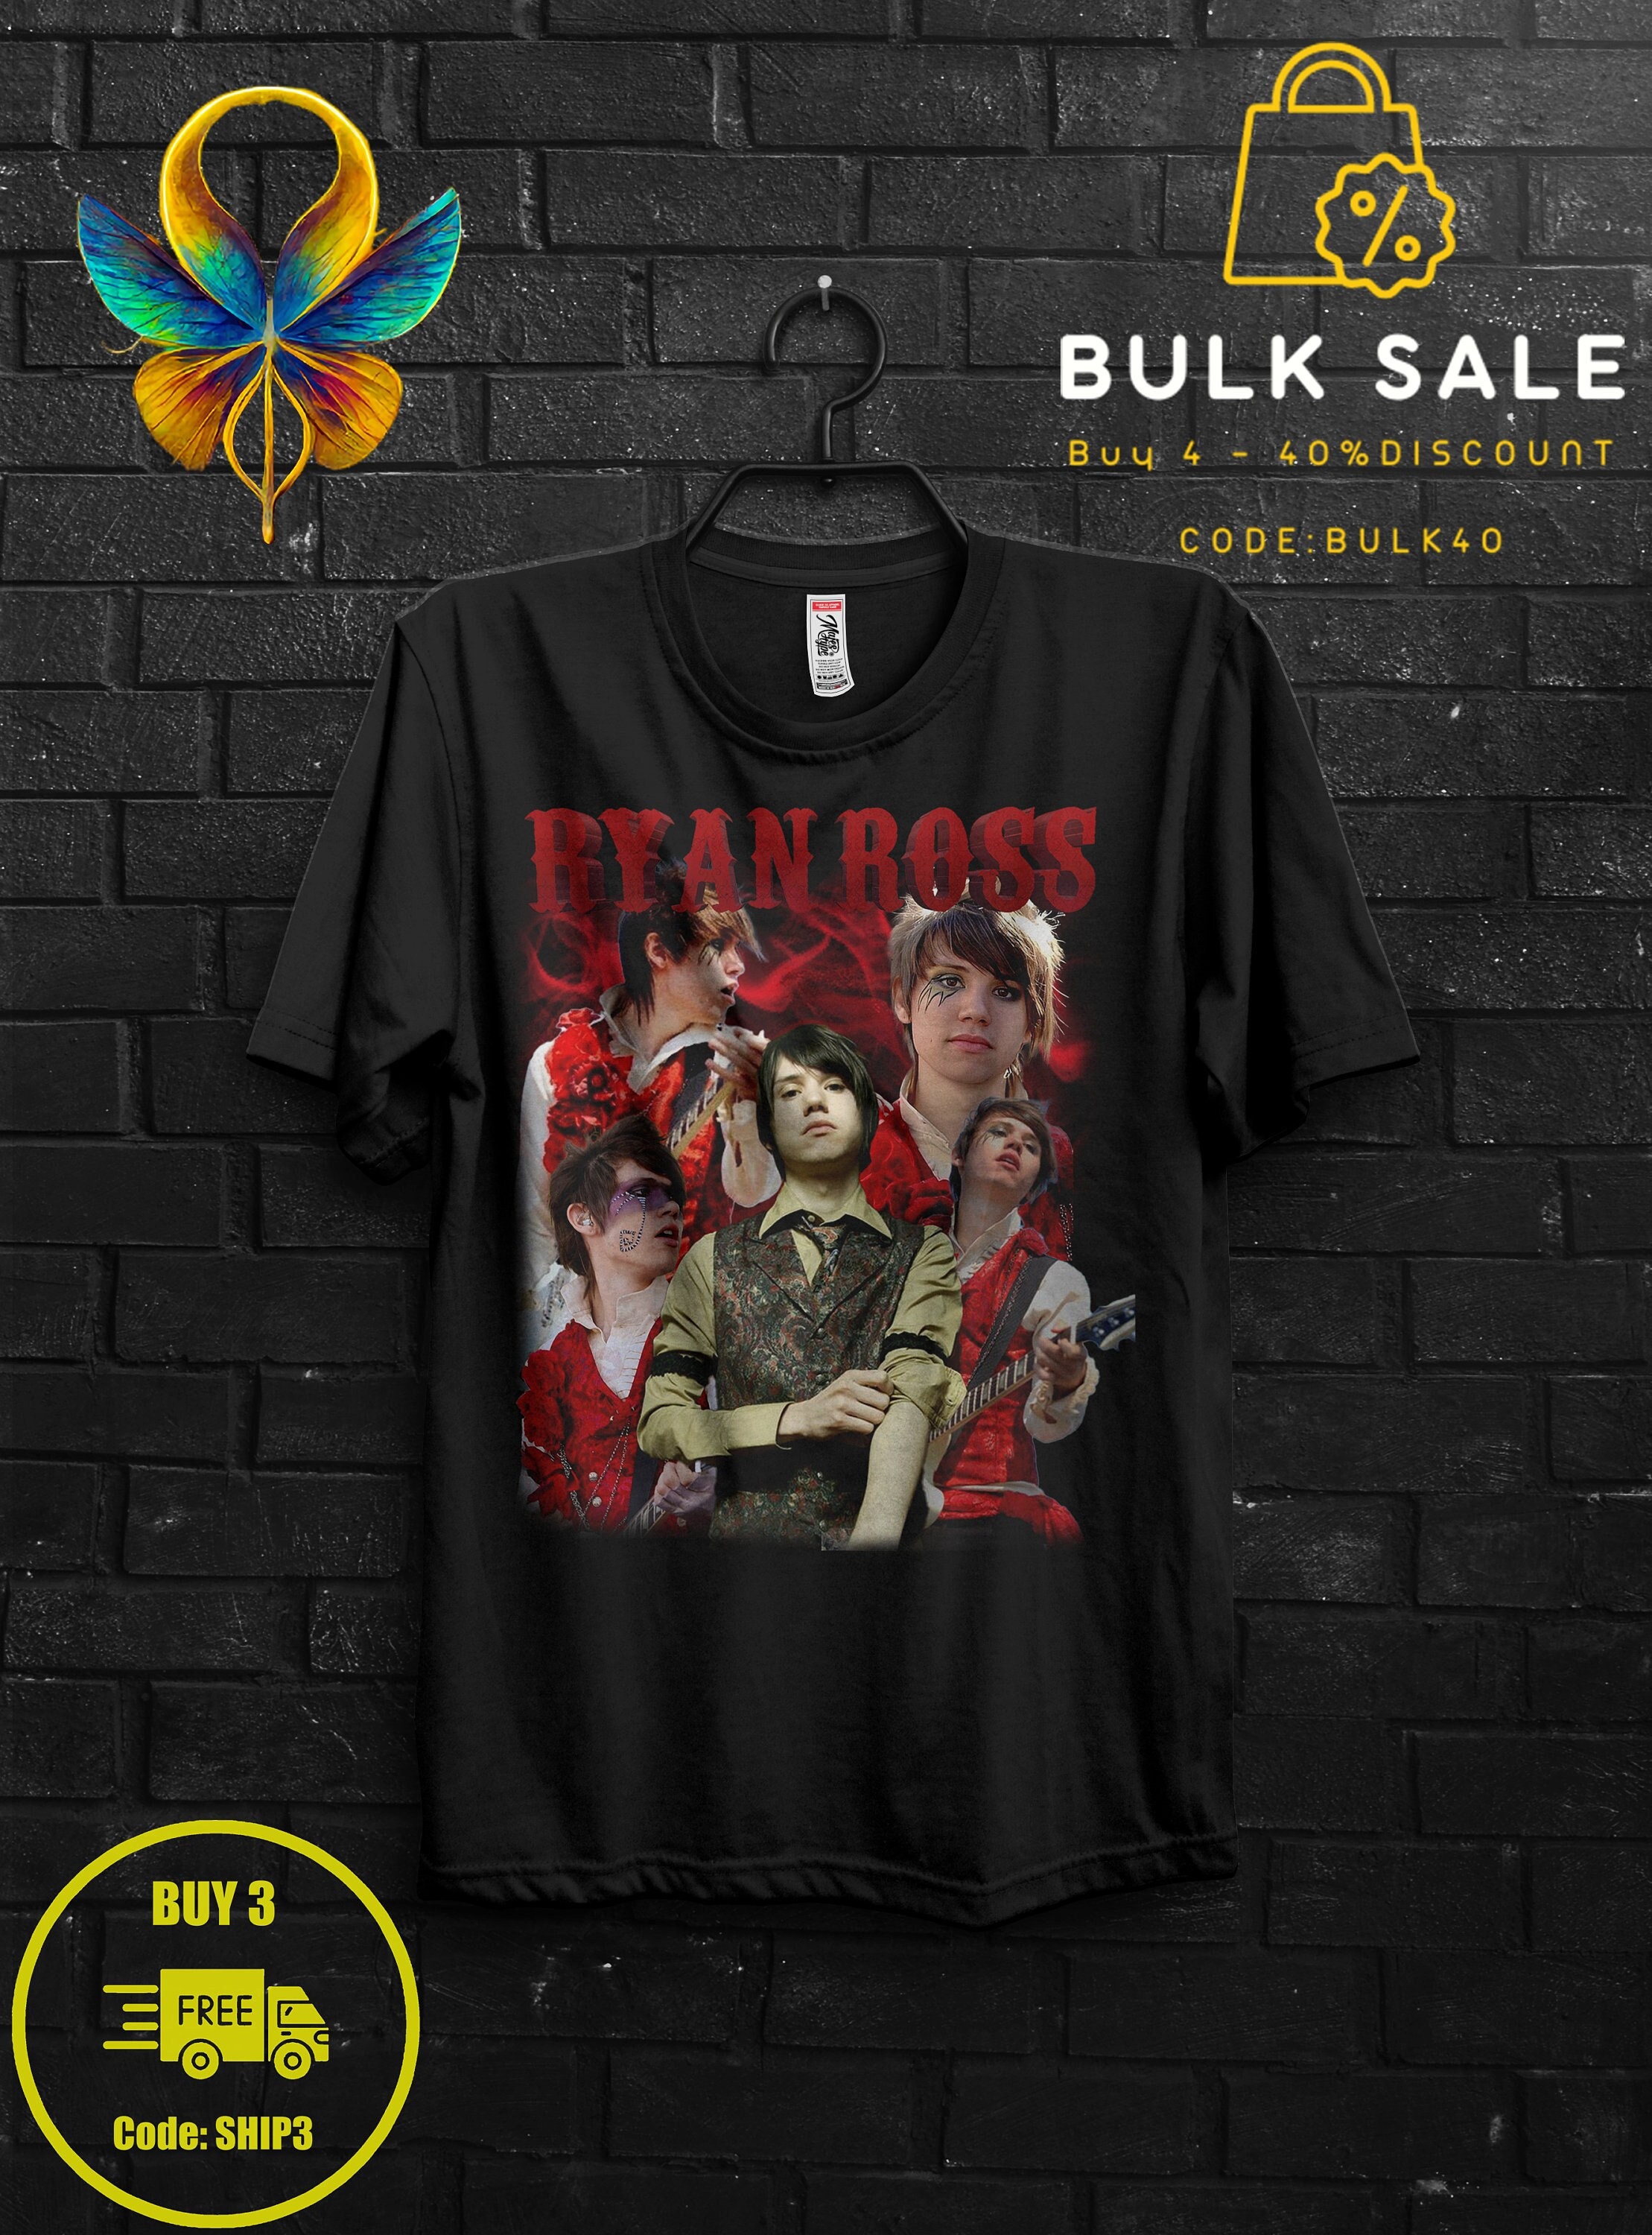 Ryan Ross Fan Gift TShirt,The Young Veins Emo Tee,Brendon Urie and John Walker Shirt,Too Weird To Live Band,Widespread Panic,Afycso Appareal 1546759224